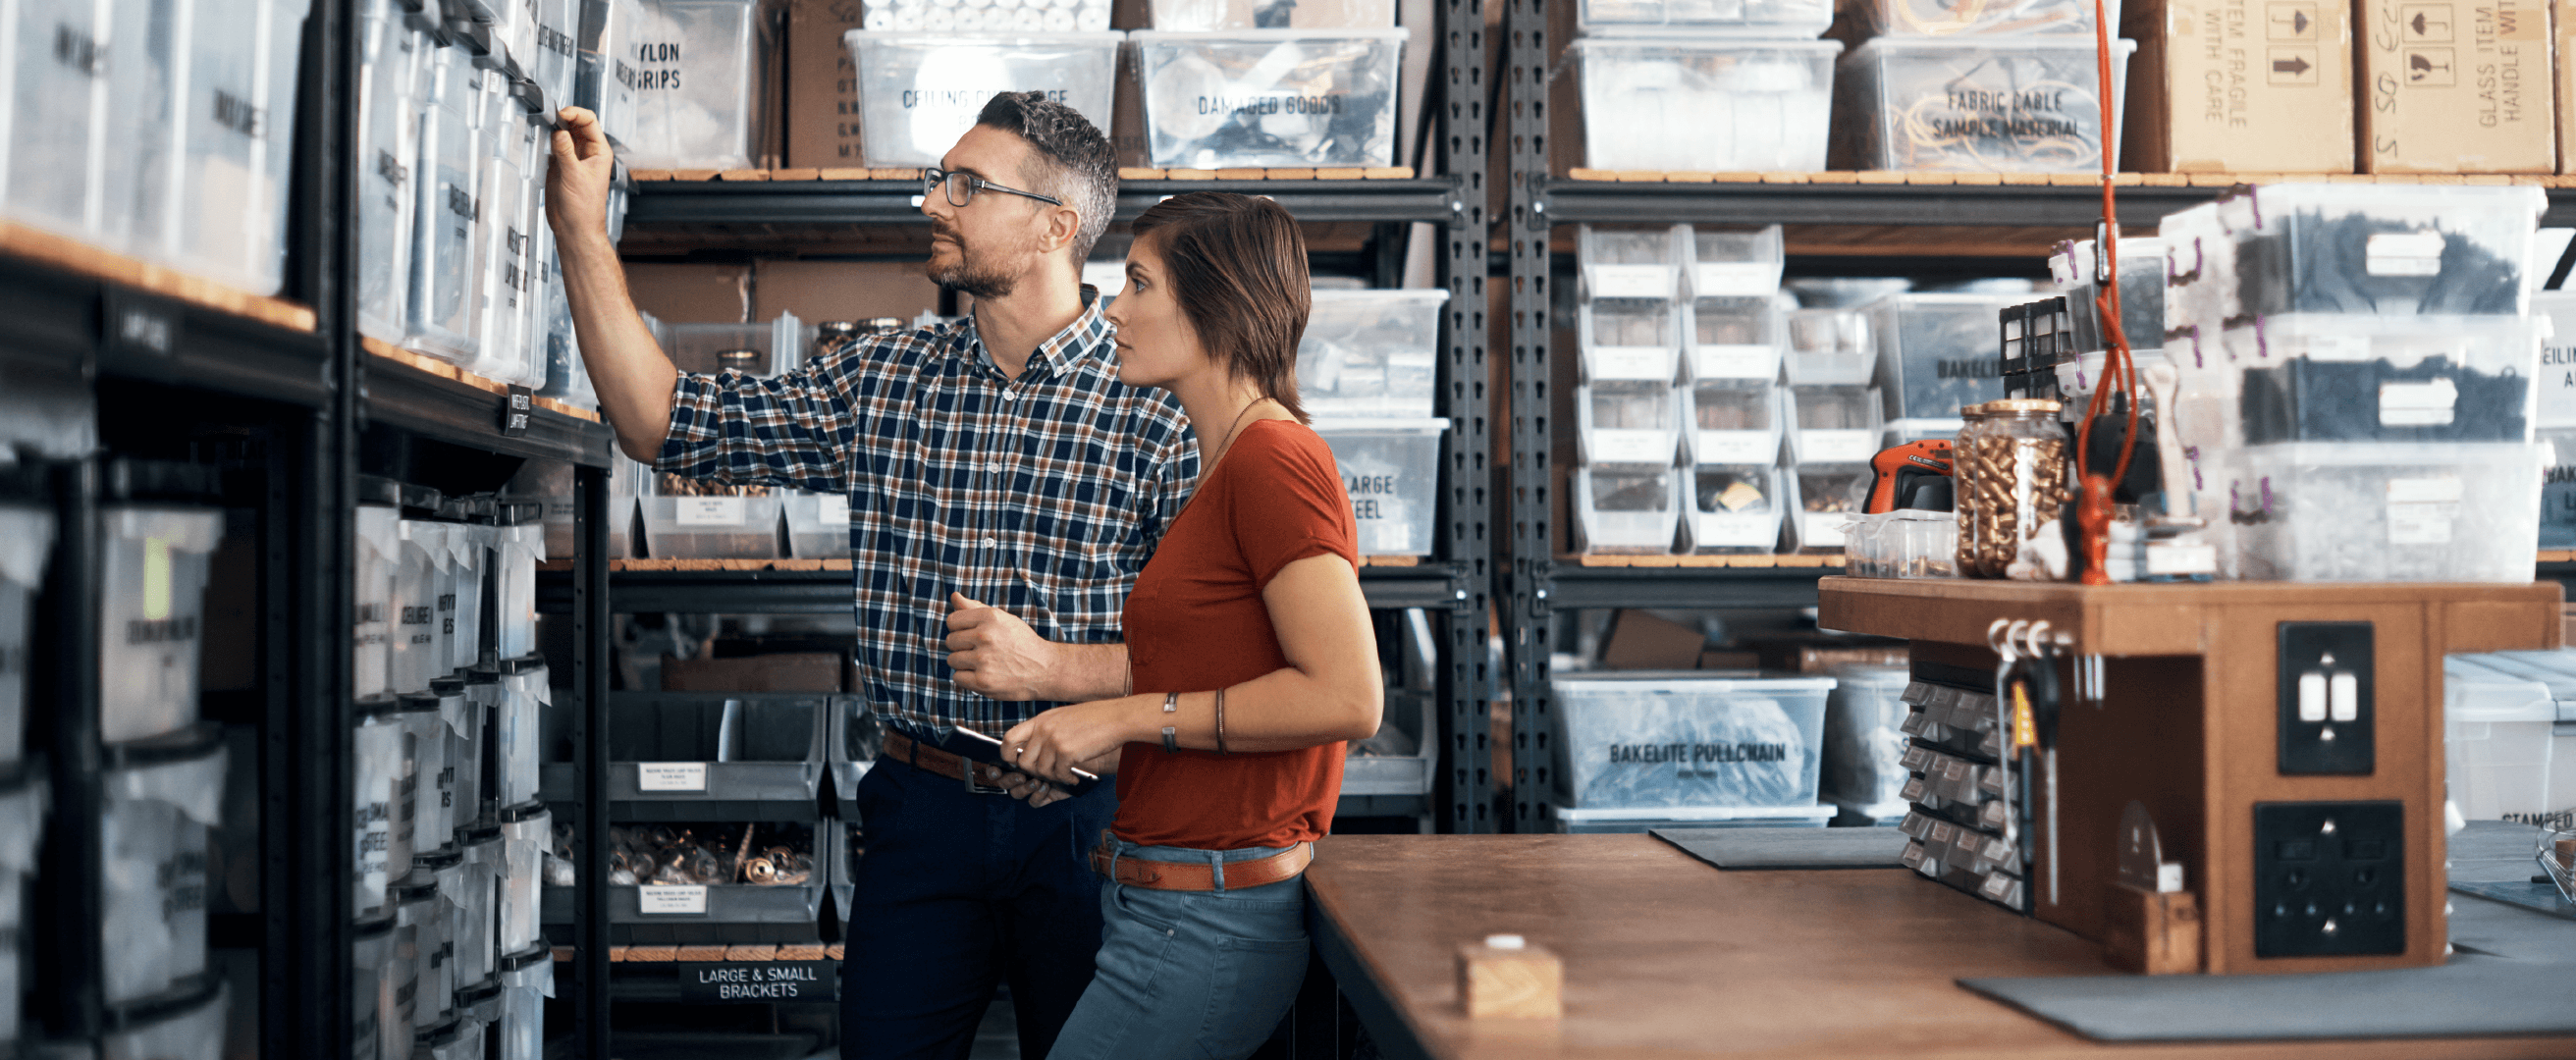 man and woman in warehouse